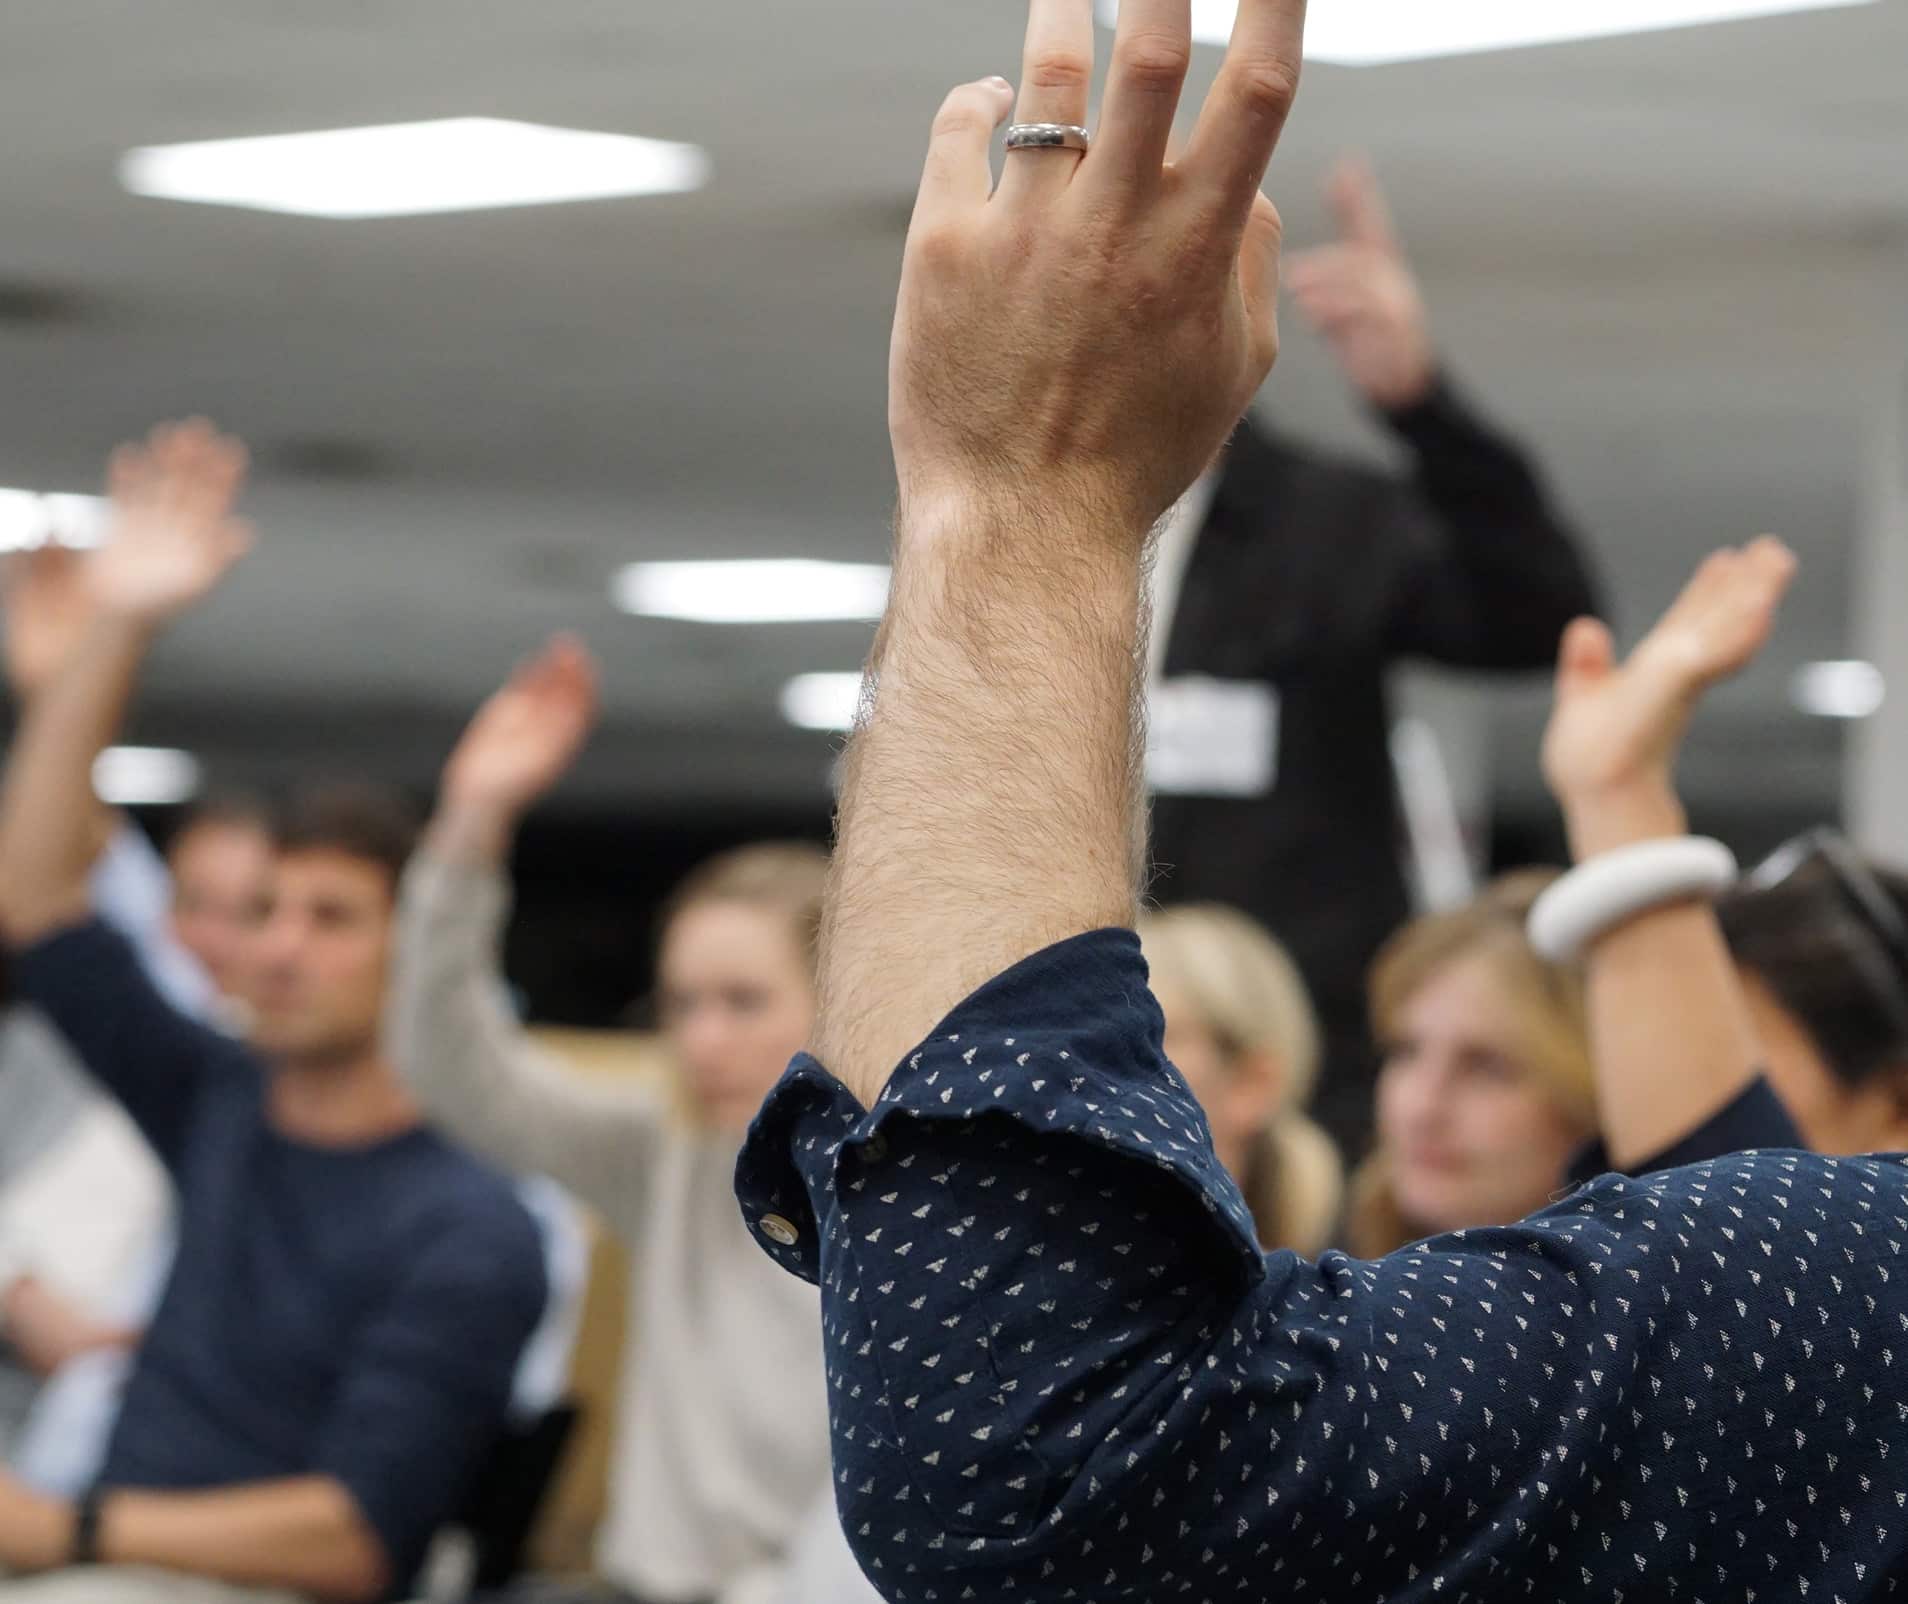 Members of the IDEA jury raise their hands to vote on a design